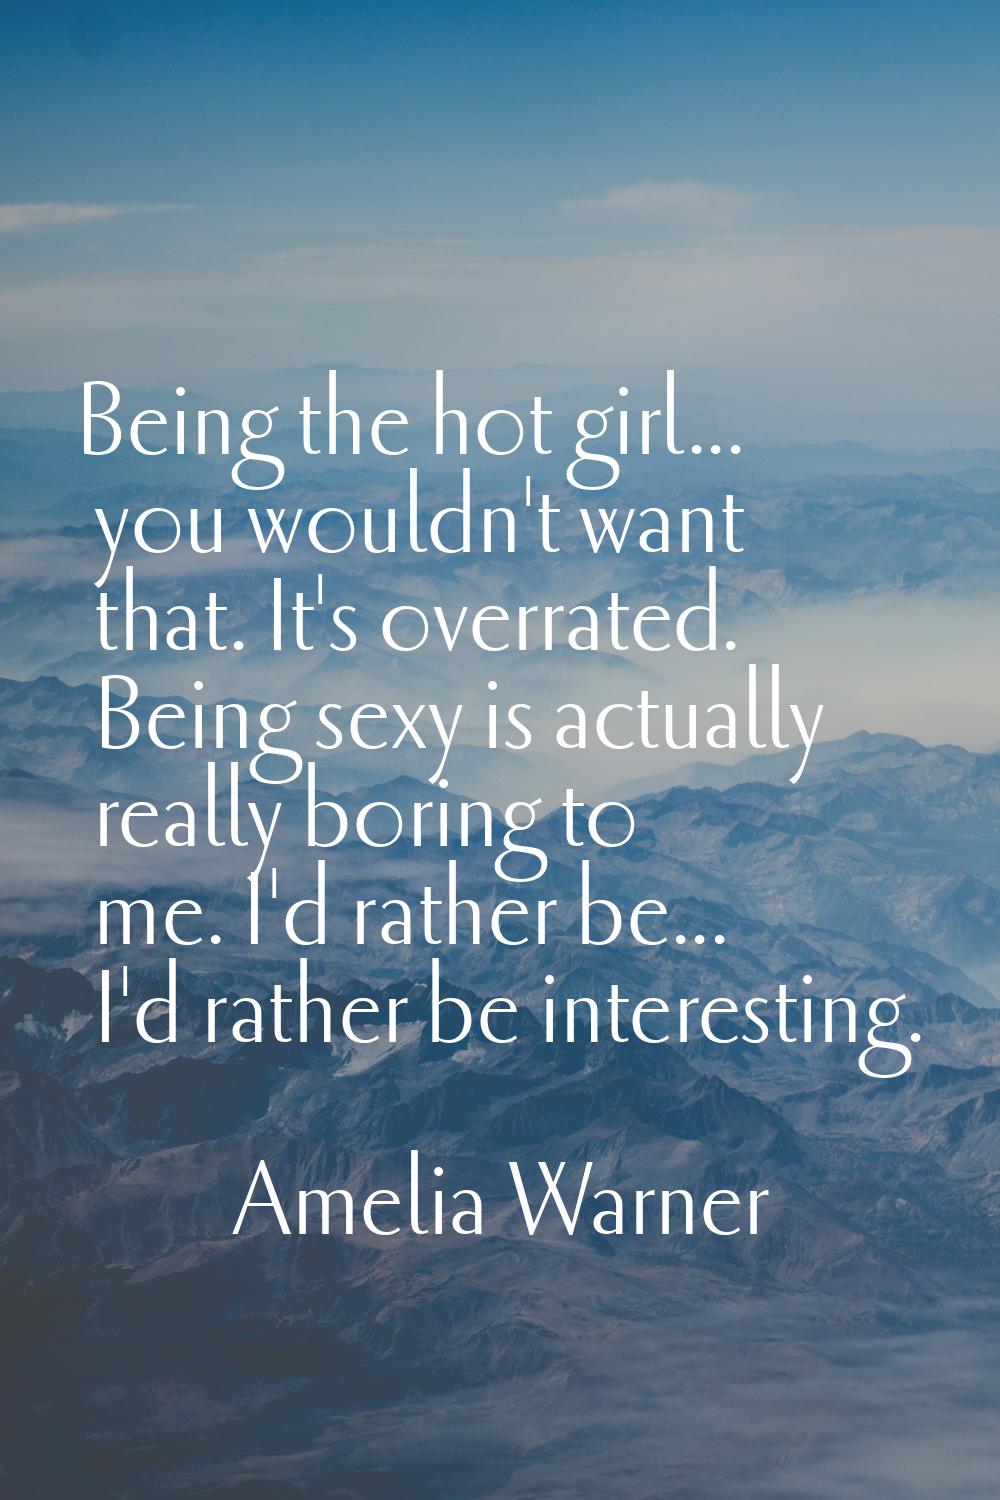 Being the hot girl... you wouldn't want that. It's overrated. Being sexy is actually really boring 